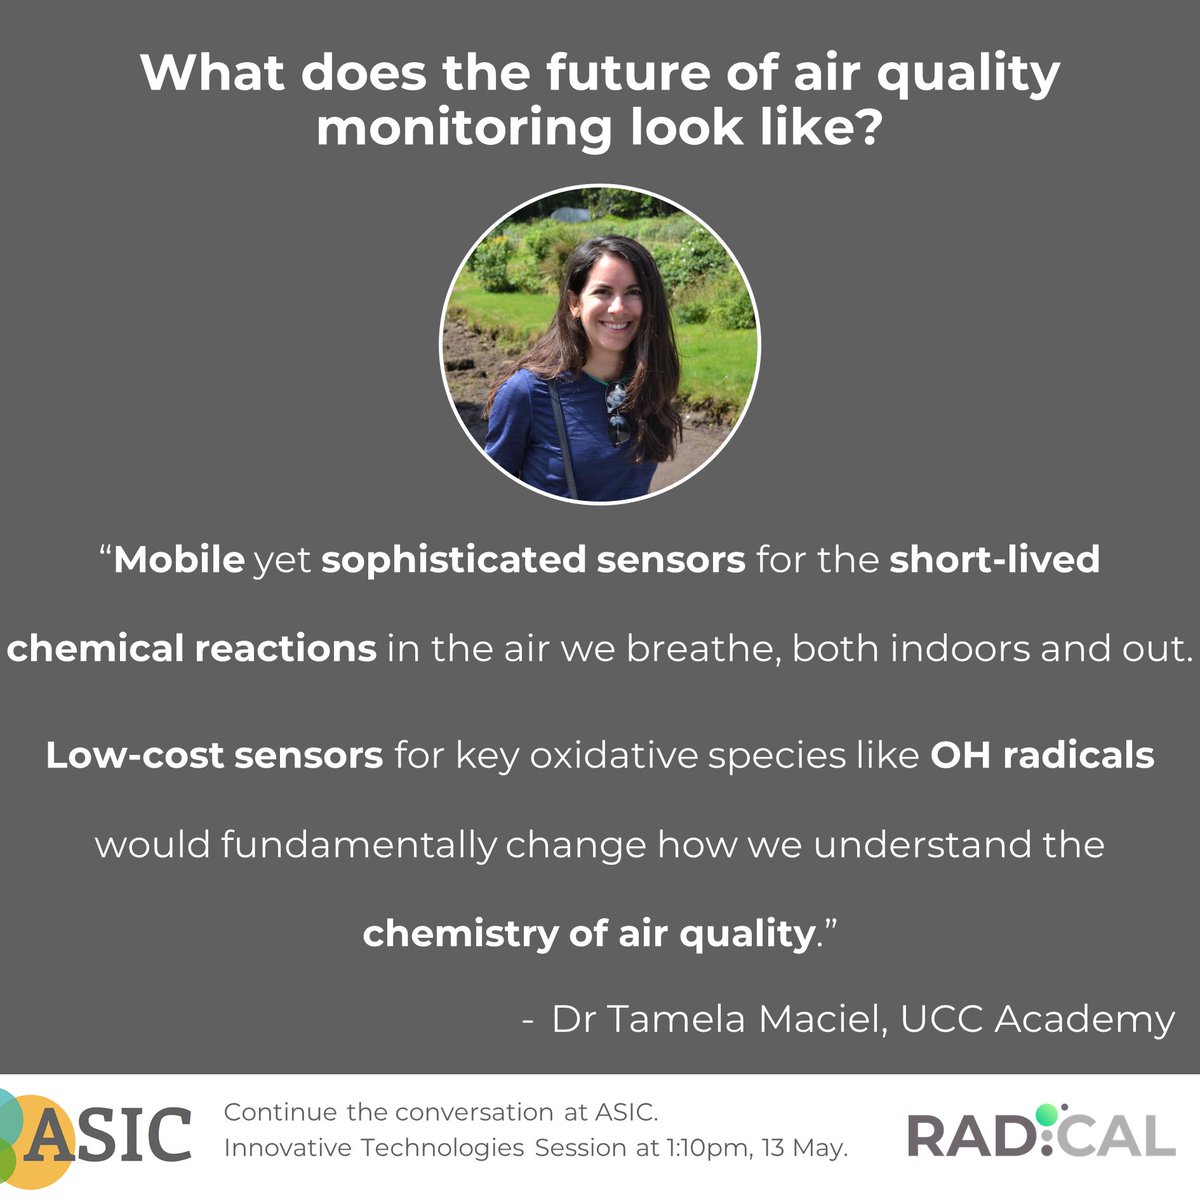 Dr Tamela Maciel, Project Manager for RADICAL says, “...Low-cost sensors for key oxidative species like OH radicals would fundamentally change how we understand the chemistry of air quality.” 

#ASIC2022 #AirSensors #AtmosphericRadicals